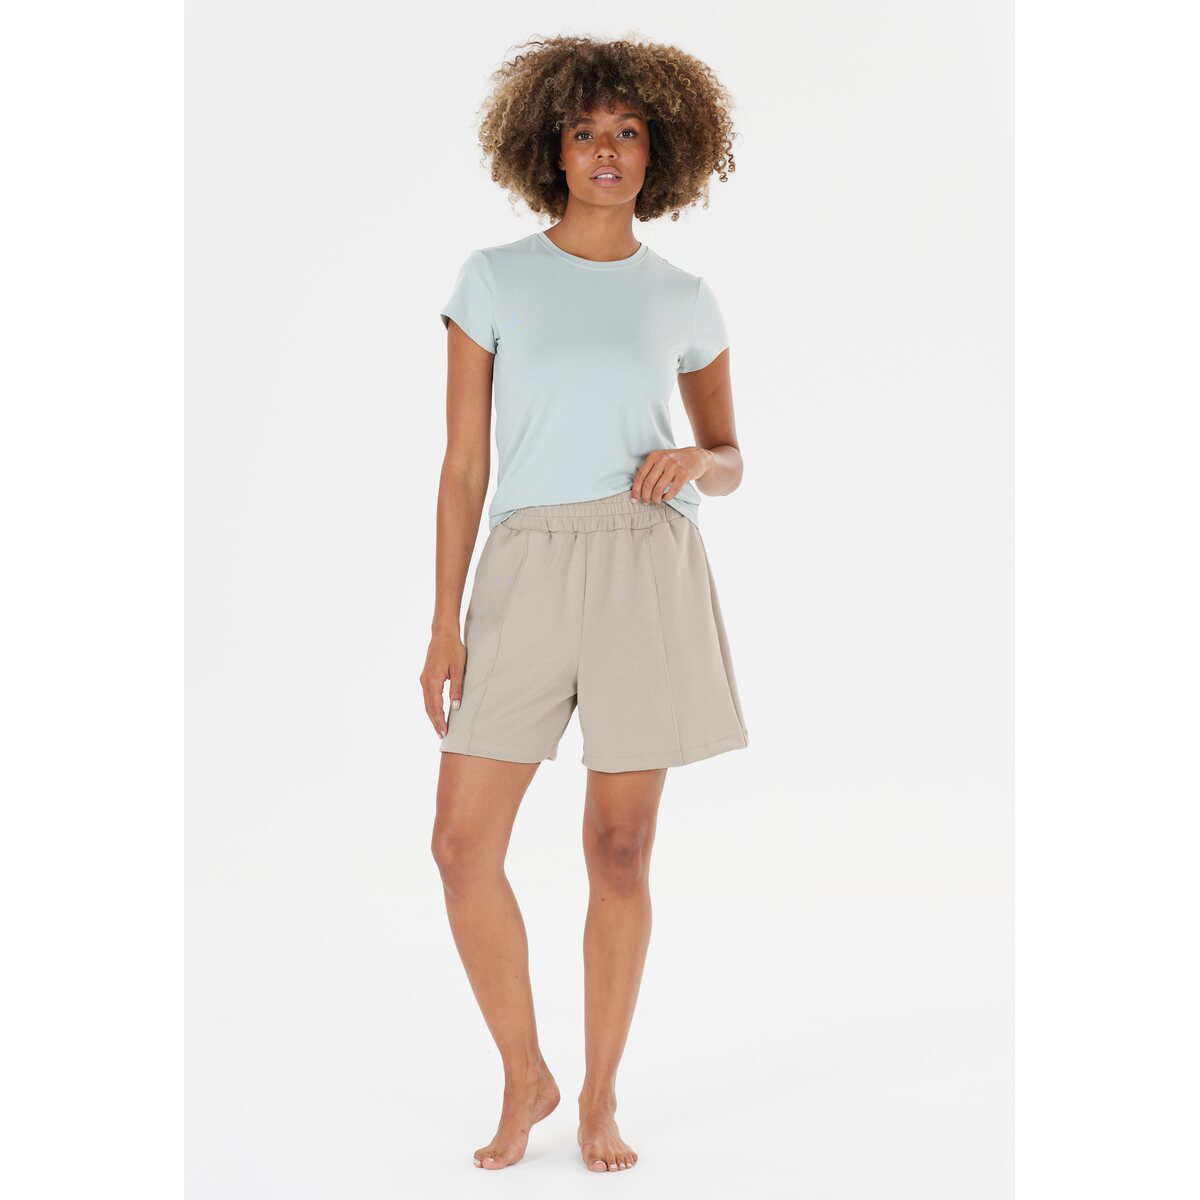 Athlecia Jacey Womenswear High Waisted Lounge Shorts 1 Shaws Department Stores